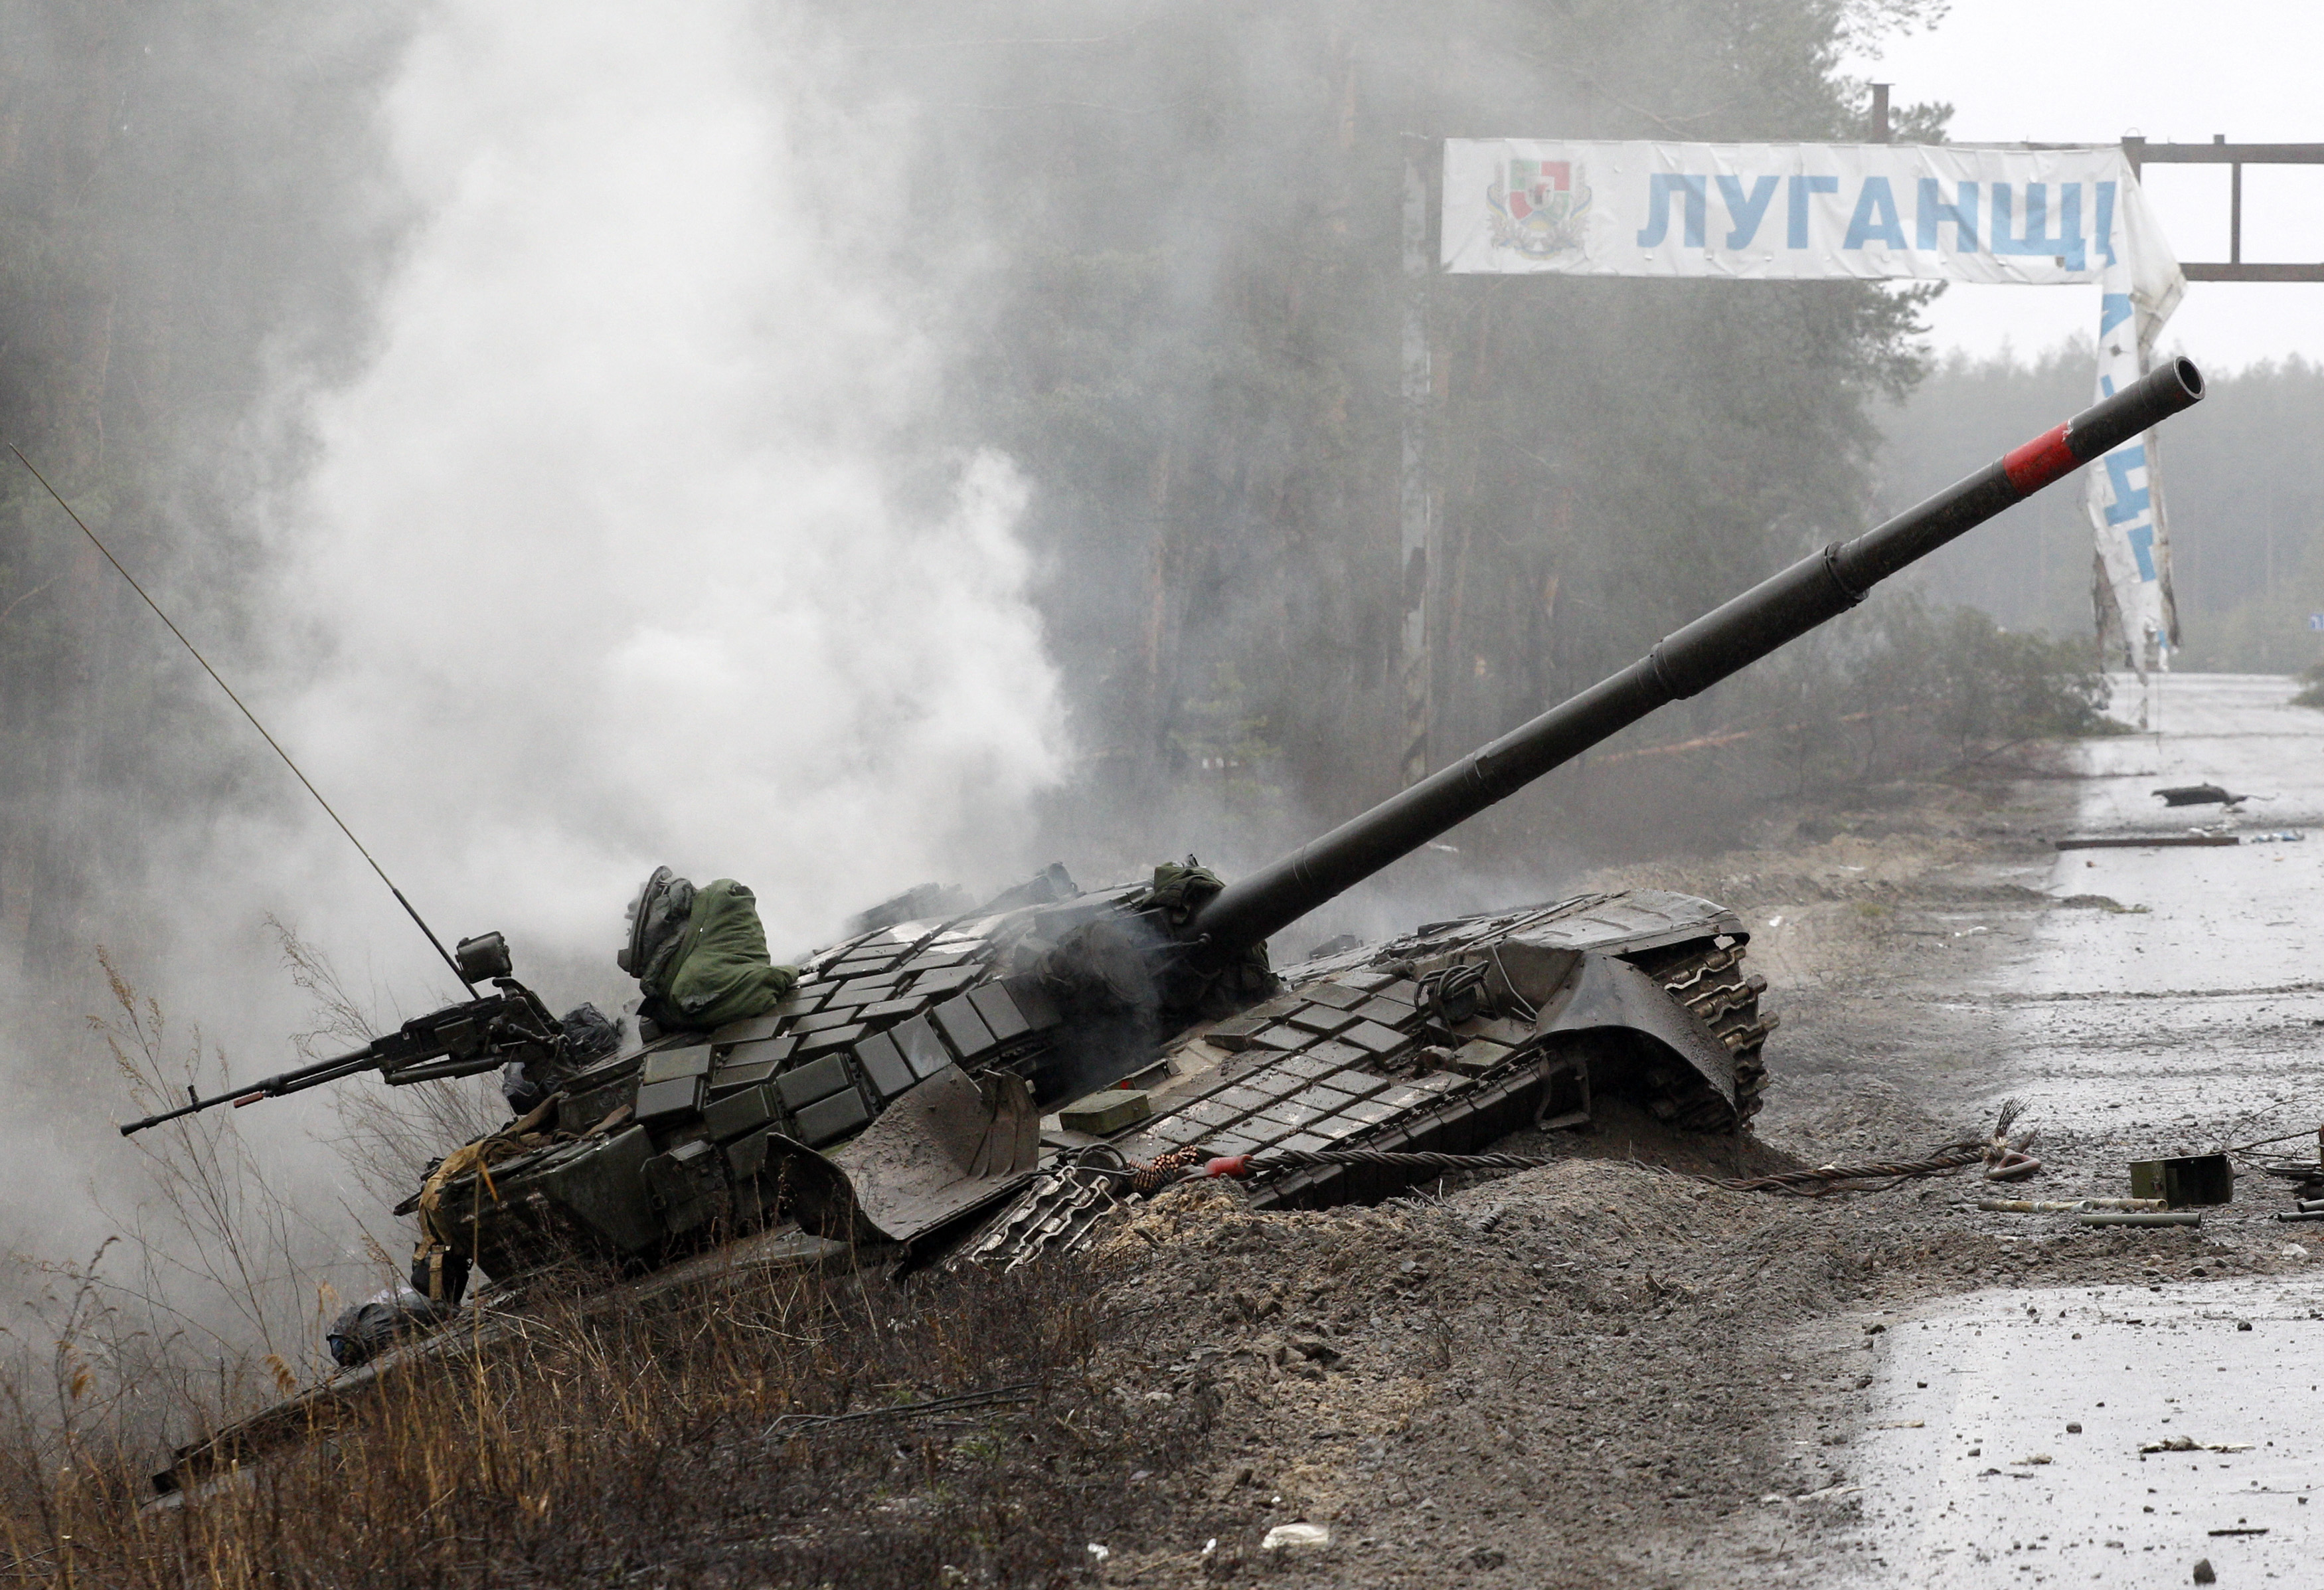 A destroyed Russian tank pictured in Luhansk Oblast on Feb. 26, 2022.